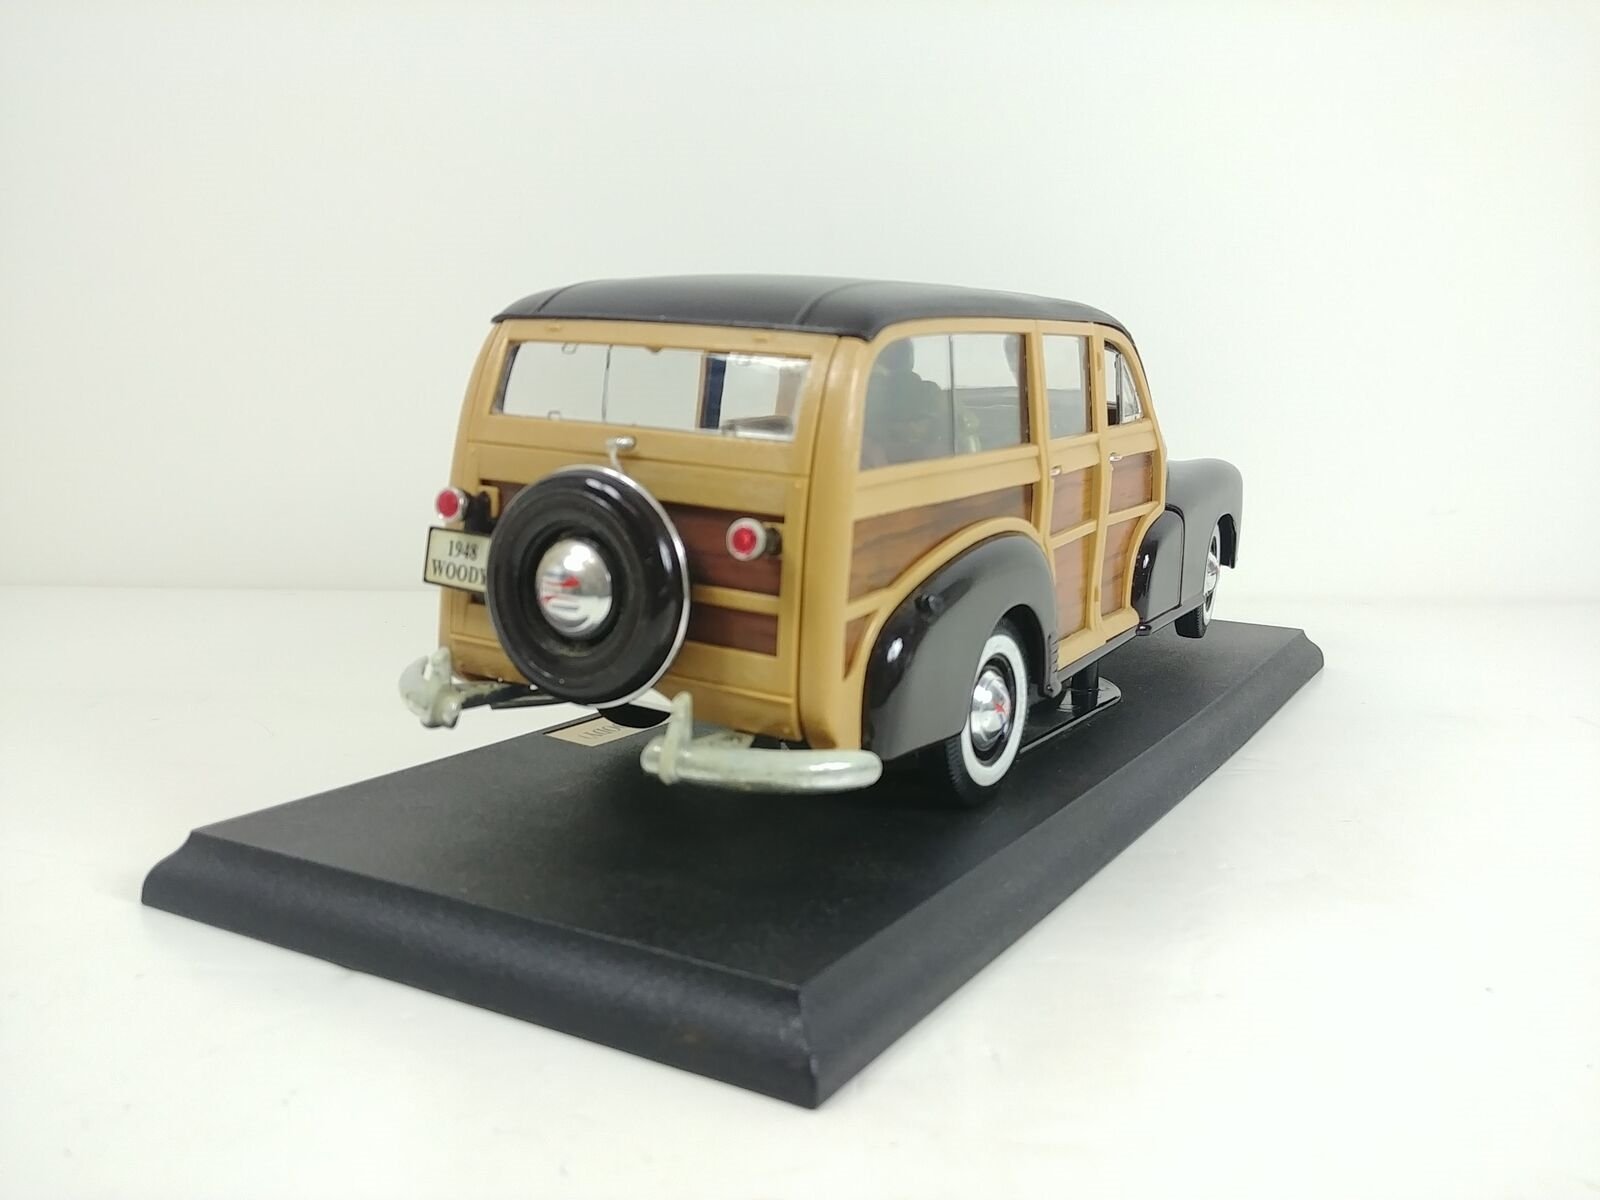 1948 Chevrolet Fleetmaster Woody Mounted on Stand 1:18 Scale